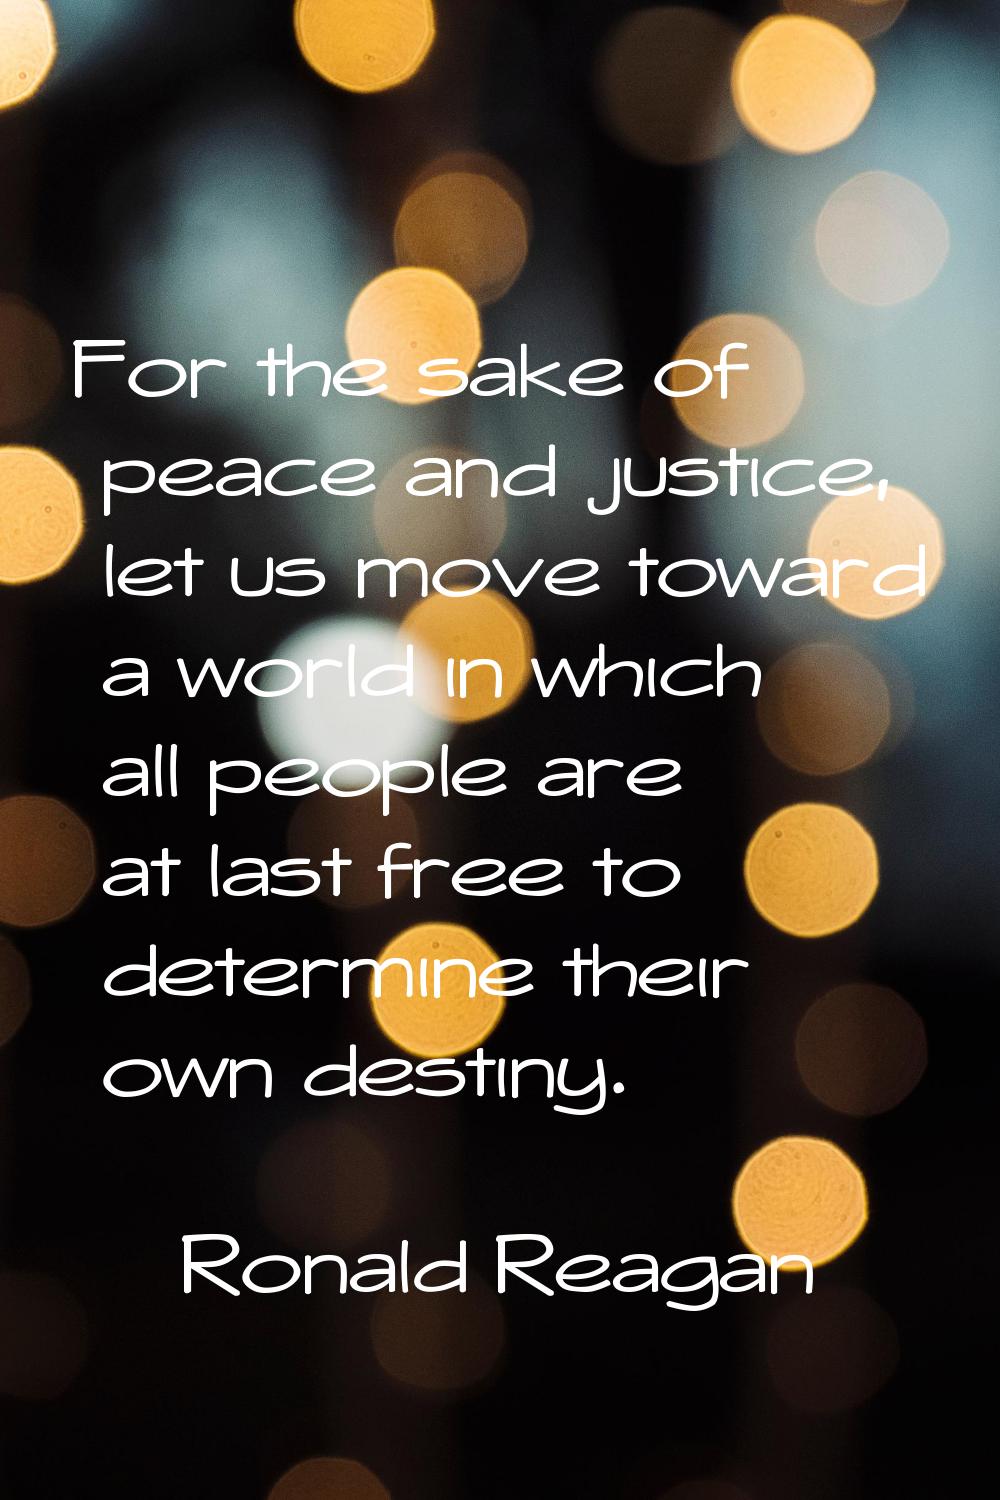 For the sake of peace and justice, let us move toward a world in which all people are at last free 